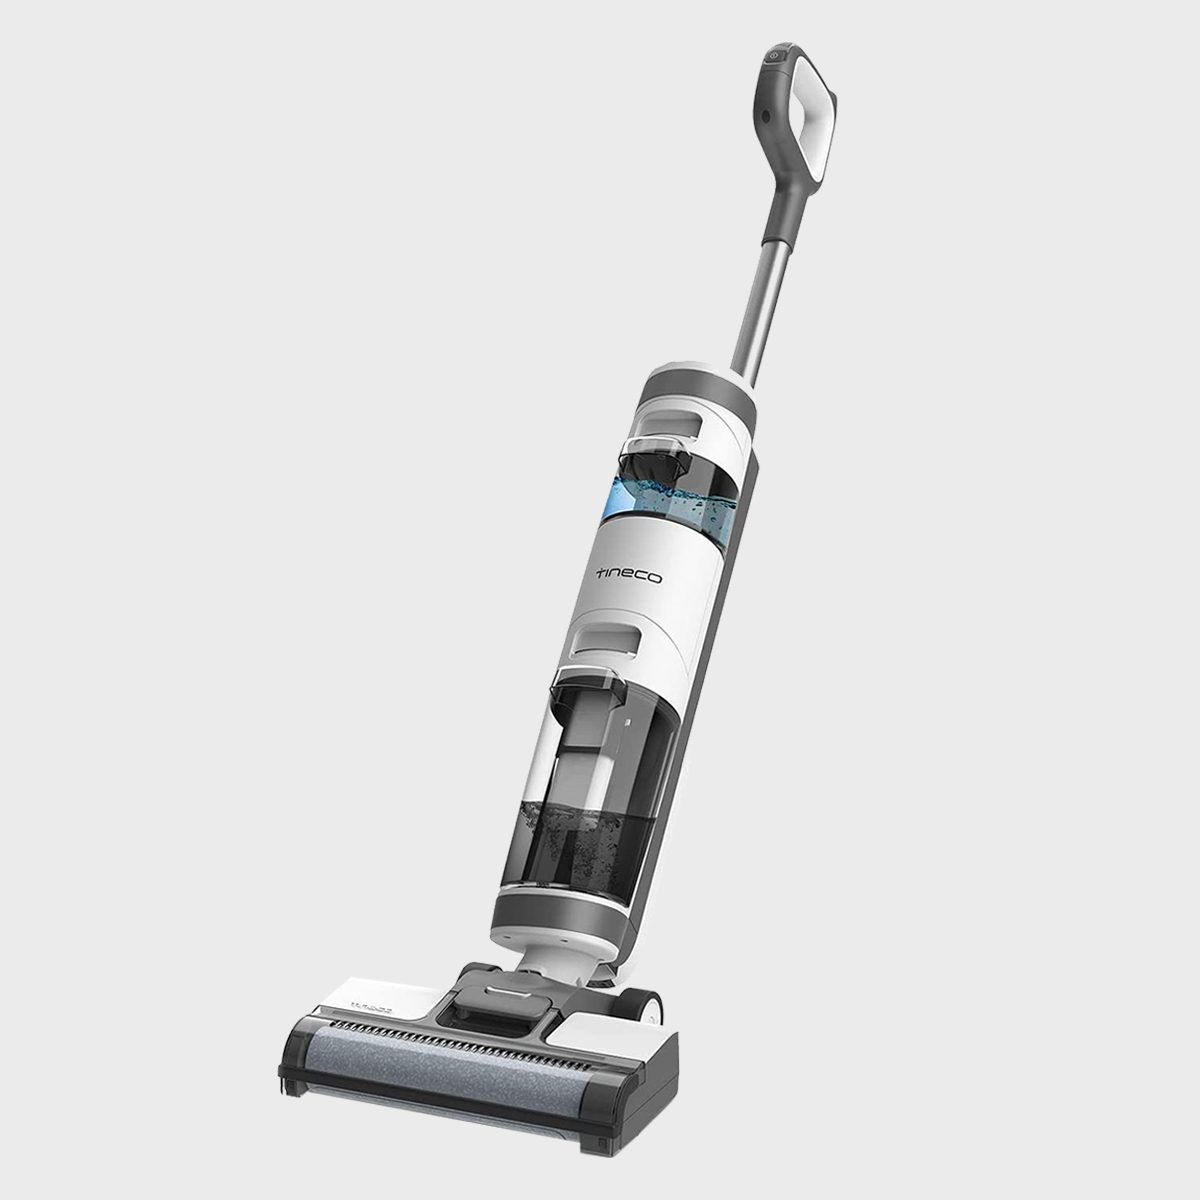 Tineco Prime Day deals ideal for cleaning stubborn messes